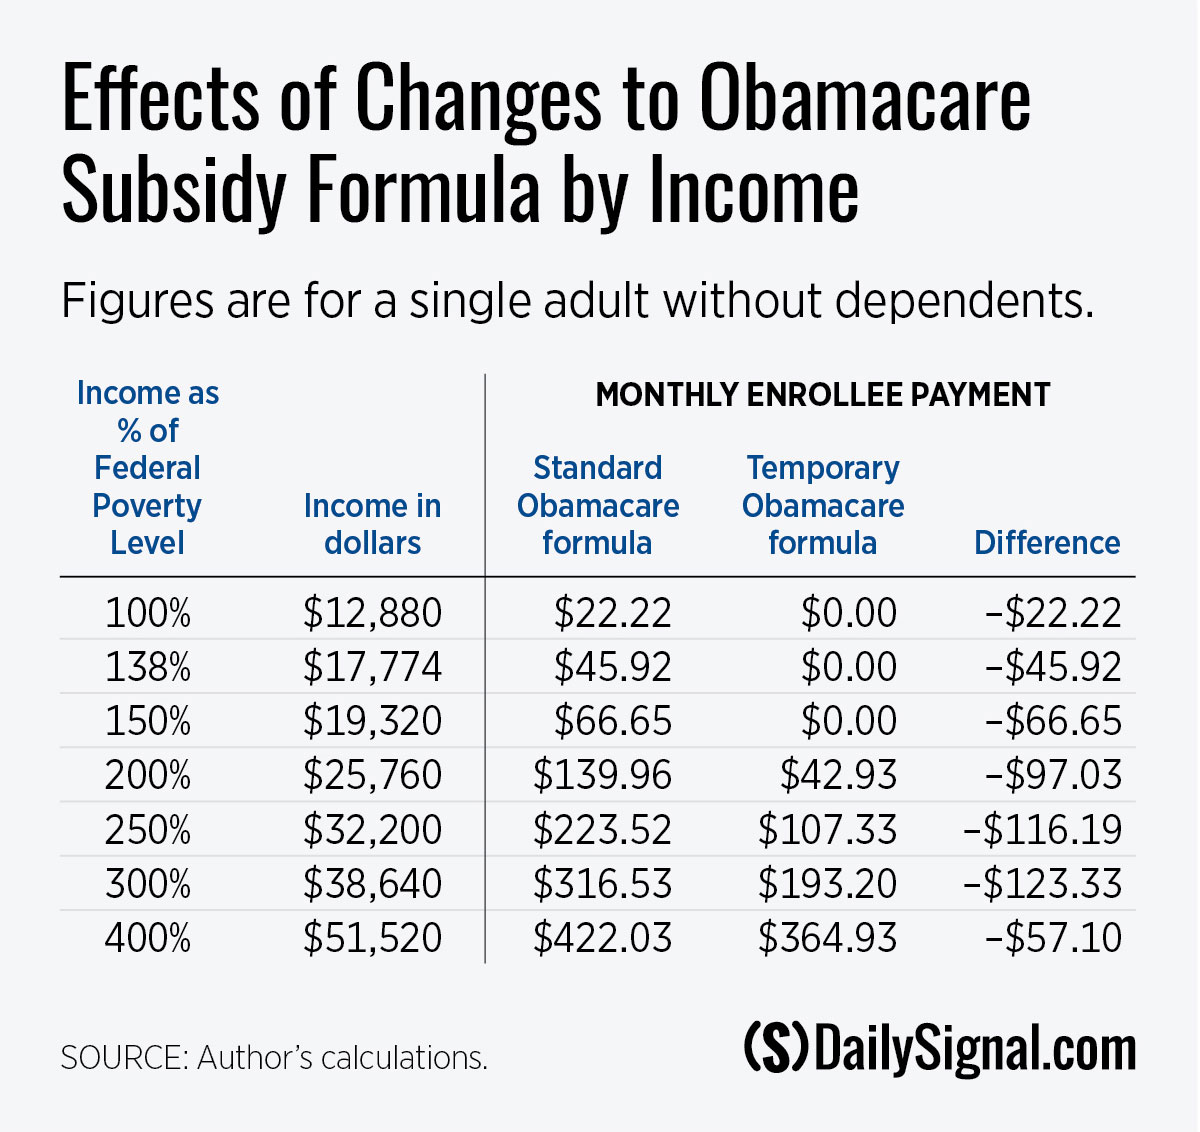 Extending Enhanced Obamacare Subsidies Would Be Costly, Ineffective